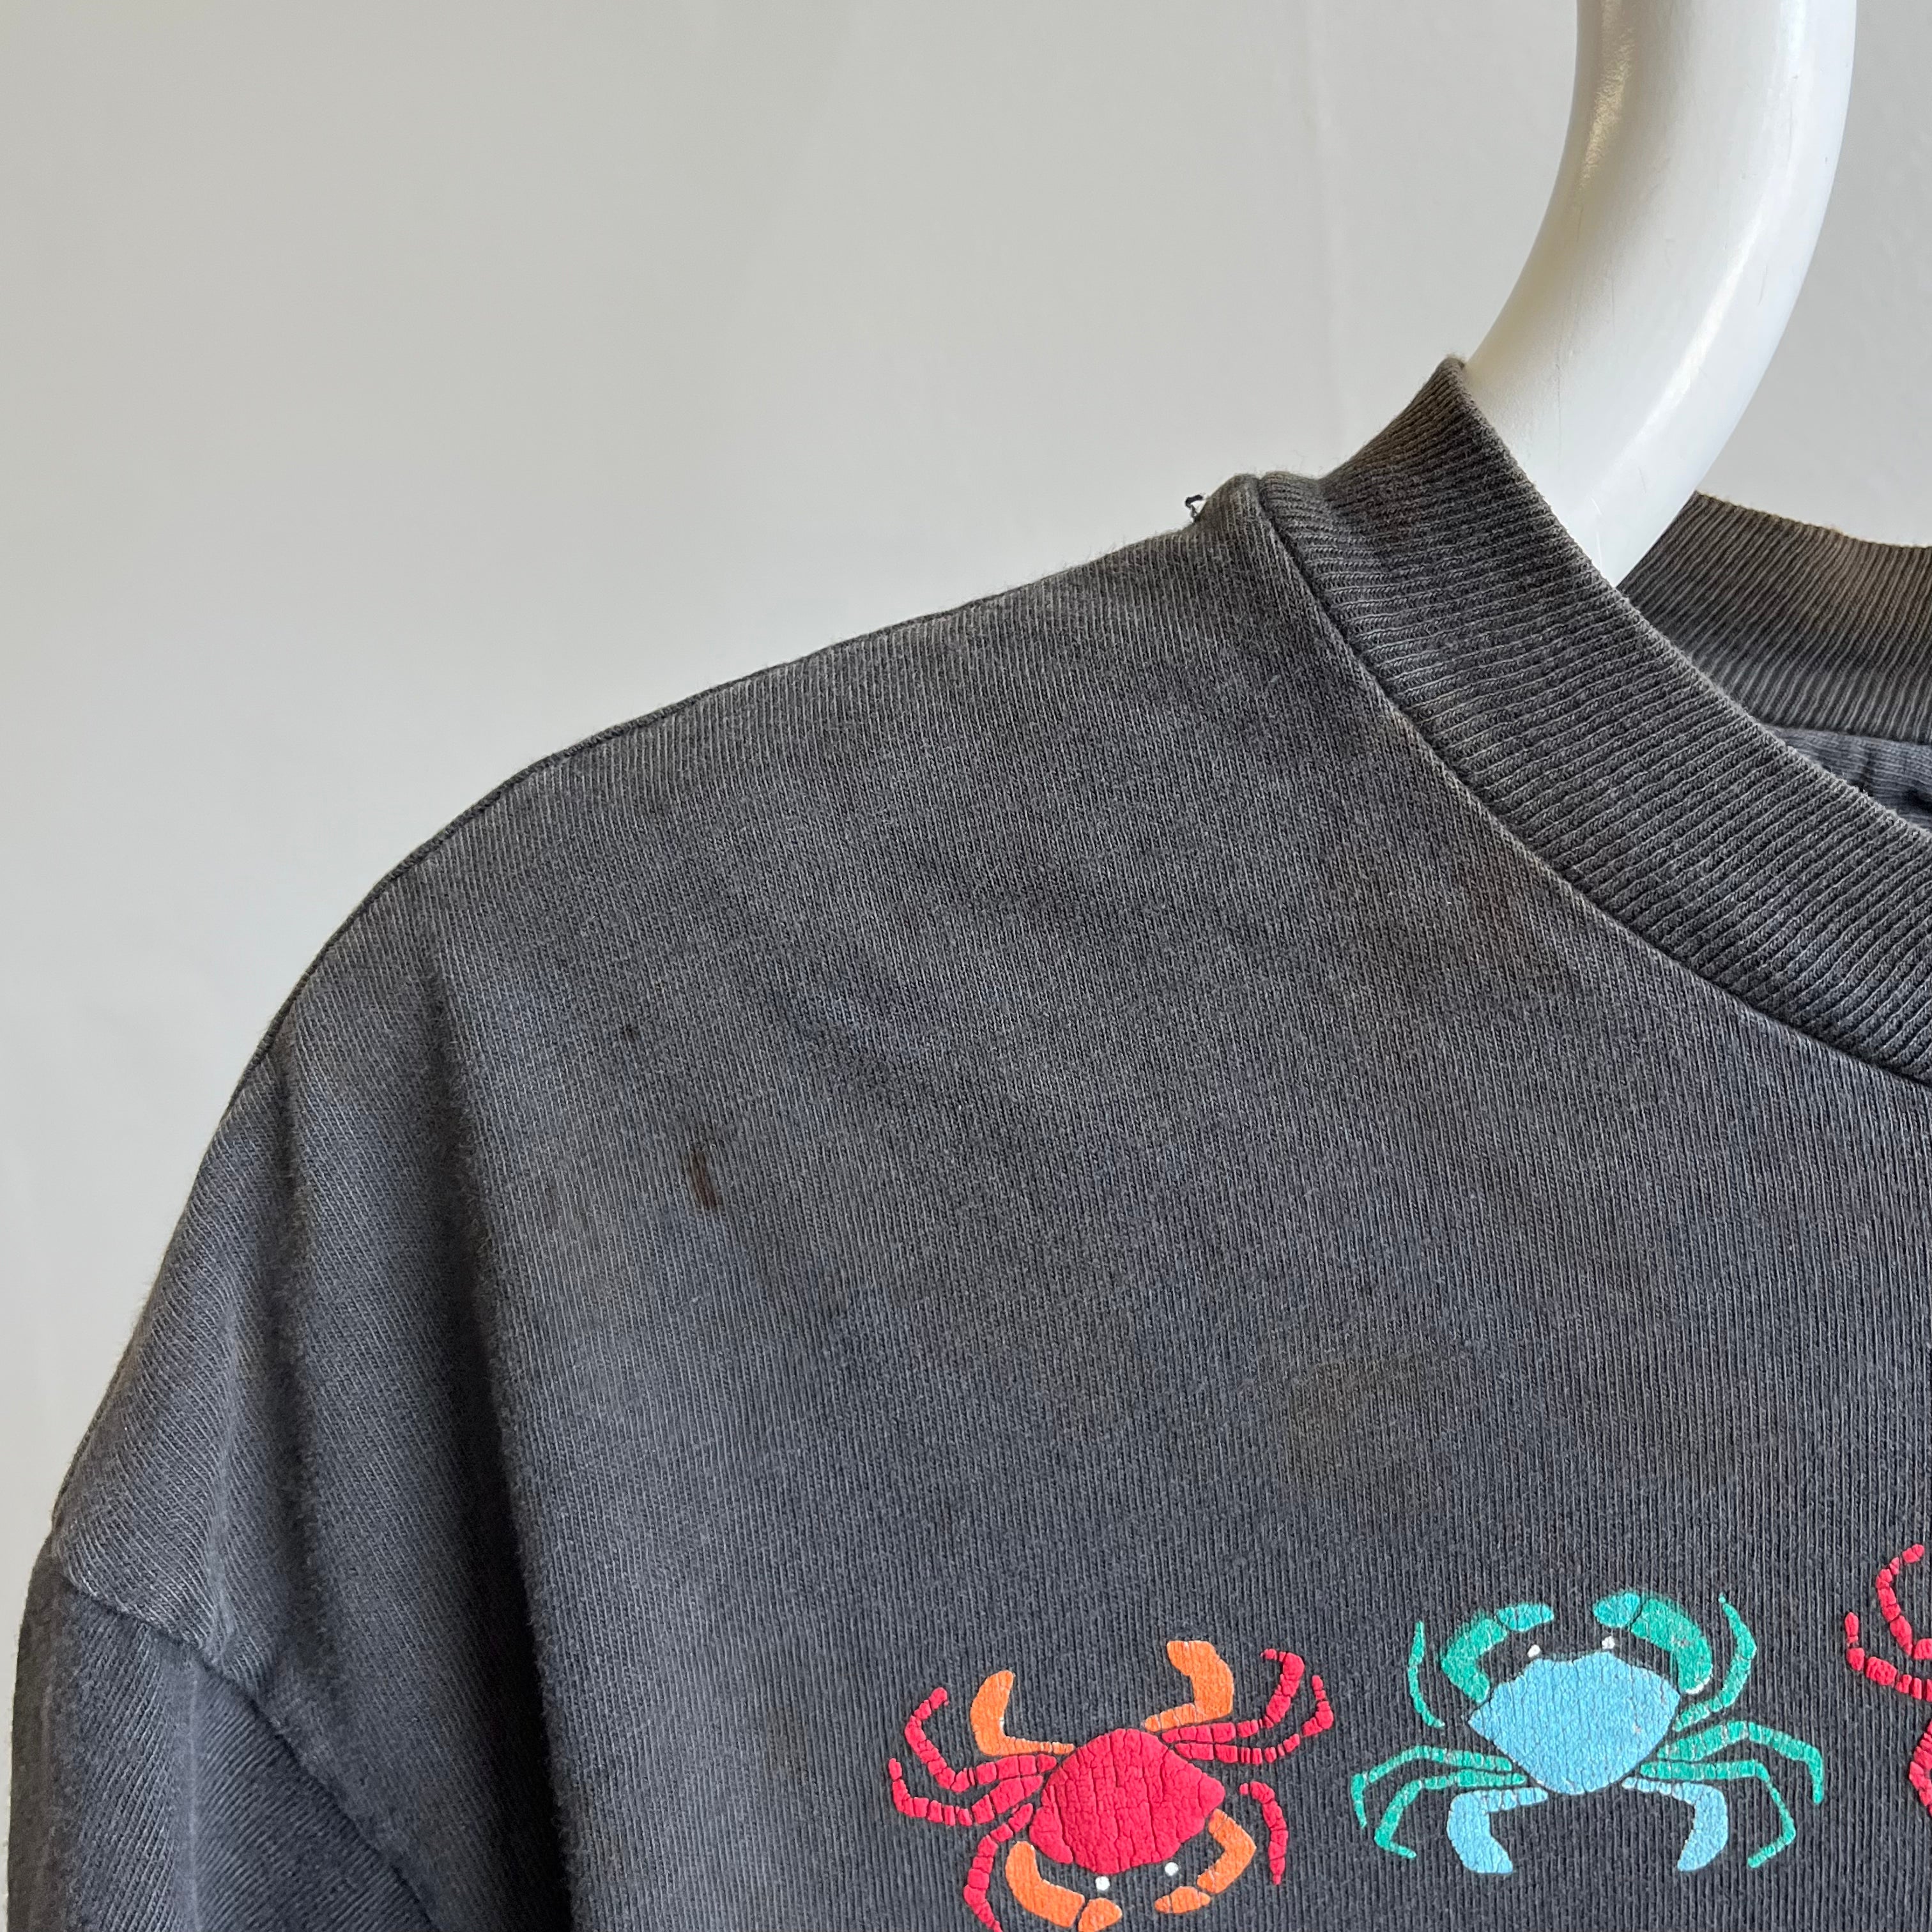 1990 Flamingo, Seahorse and Crab T-Shirt with Epic Staining